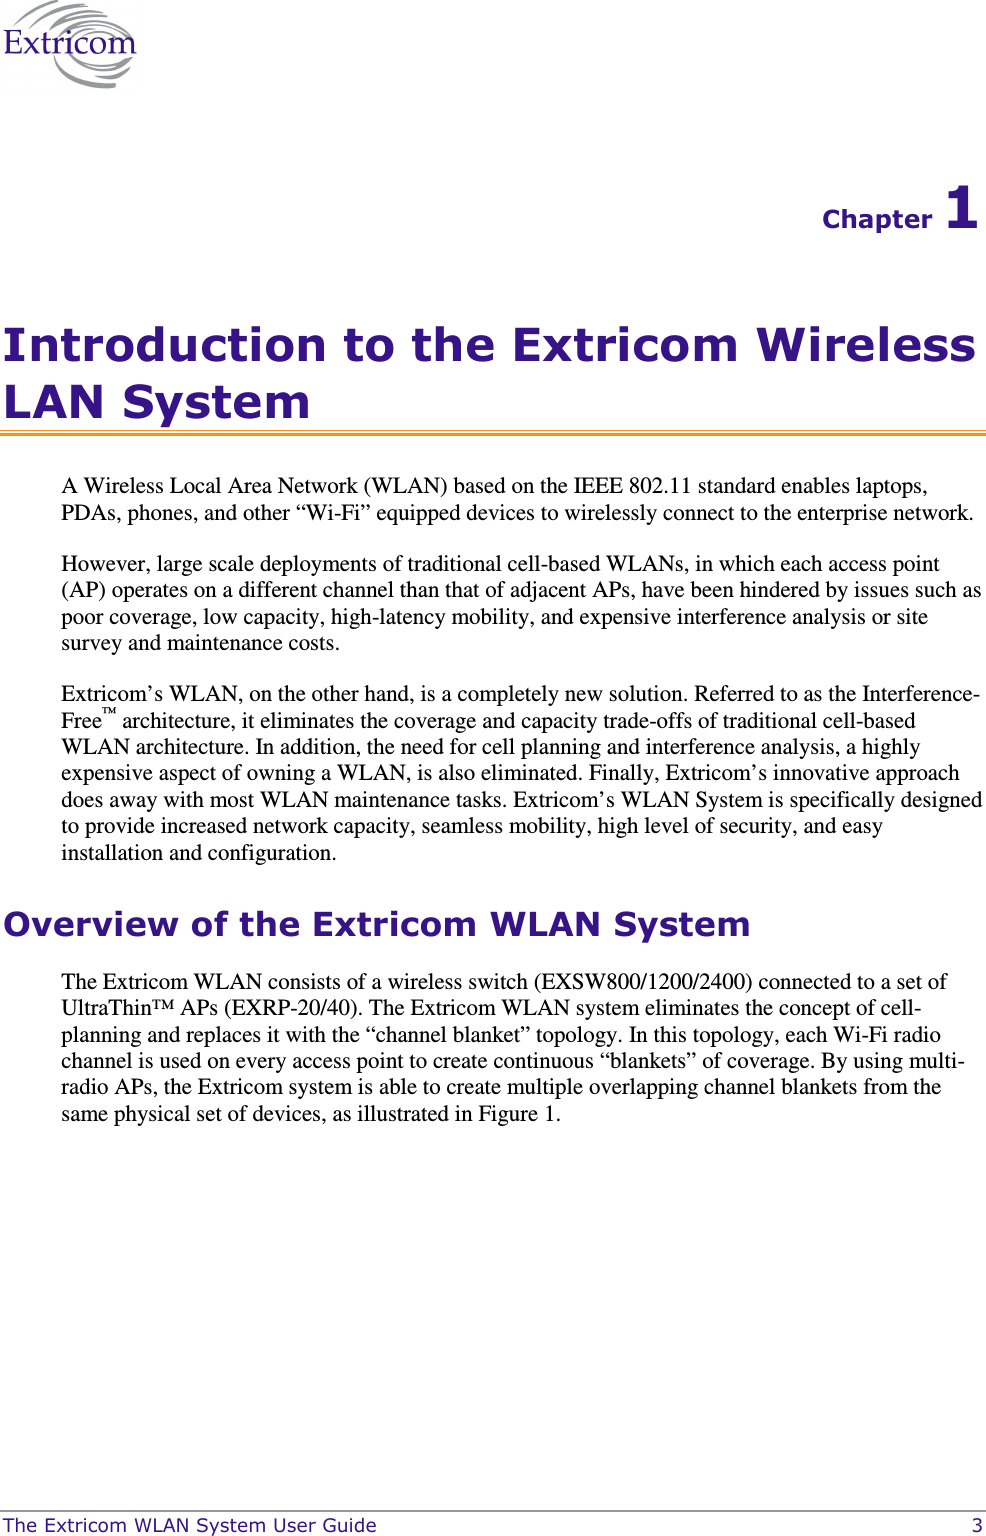  The Extricom WLAN System User Guide    3 Chapter 1 Introduction to the Extricom Wireless LAN System A Wireless Local Area Network (WLAN) based on the IEEE 802.11 standard enables laptops, PDAs, phones, and other “Wi-Fi” equipped devices to wirelessly connect to the enterprise network.  However, large scale deployments of traditional cell-based WLANs, in which each access point (AP) operates on a different channel than that of adjacent APs, have been hindered by issues such as poor coverage, low capacity, high-latency mobility, and expensive interference analysis or site survey and maintenance costs.  Extricom’s WLAN, on the other hand, is a completely new solution. Referred to as the Interference-Free™ architecture, it eliminates the coverage and capacity trade-offs of traditional cell-based WLAN architecture. In addition, the need for cell planning and interference analysis, a highly expensive aspect of owning a WLAN, is also eliminated. Finally, Extricom’s innovative approach does away with most WLAN maintenance tasks. Extricom’s WLAN System is specifically designed to provide increased network capacity, seamless mobility, high level of security, and easy installation and configuration.  Overview of the Extricom WLAN System The Extricom WLAN consists of a wireless switch (EXSW800/1200/2400) connected to a set of UltraThin™ APs (EXRP-20/40). The Extricom WLAN system eliminates the concept of cell-planning and replaces it with the “channel blanket” topology. In this topology, each Wi-Fi radio channel is used on every access point to create continuous “blankets” of coverage. By using multi-radio APs, the Extricom system is able to create multiple overlapping channel blankets from the same physical set of devices, as illustrated in Figure 1. 